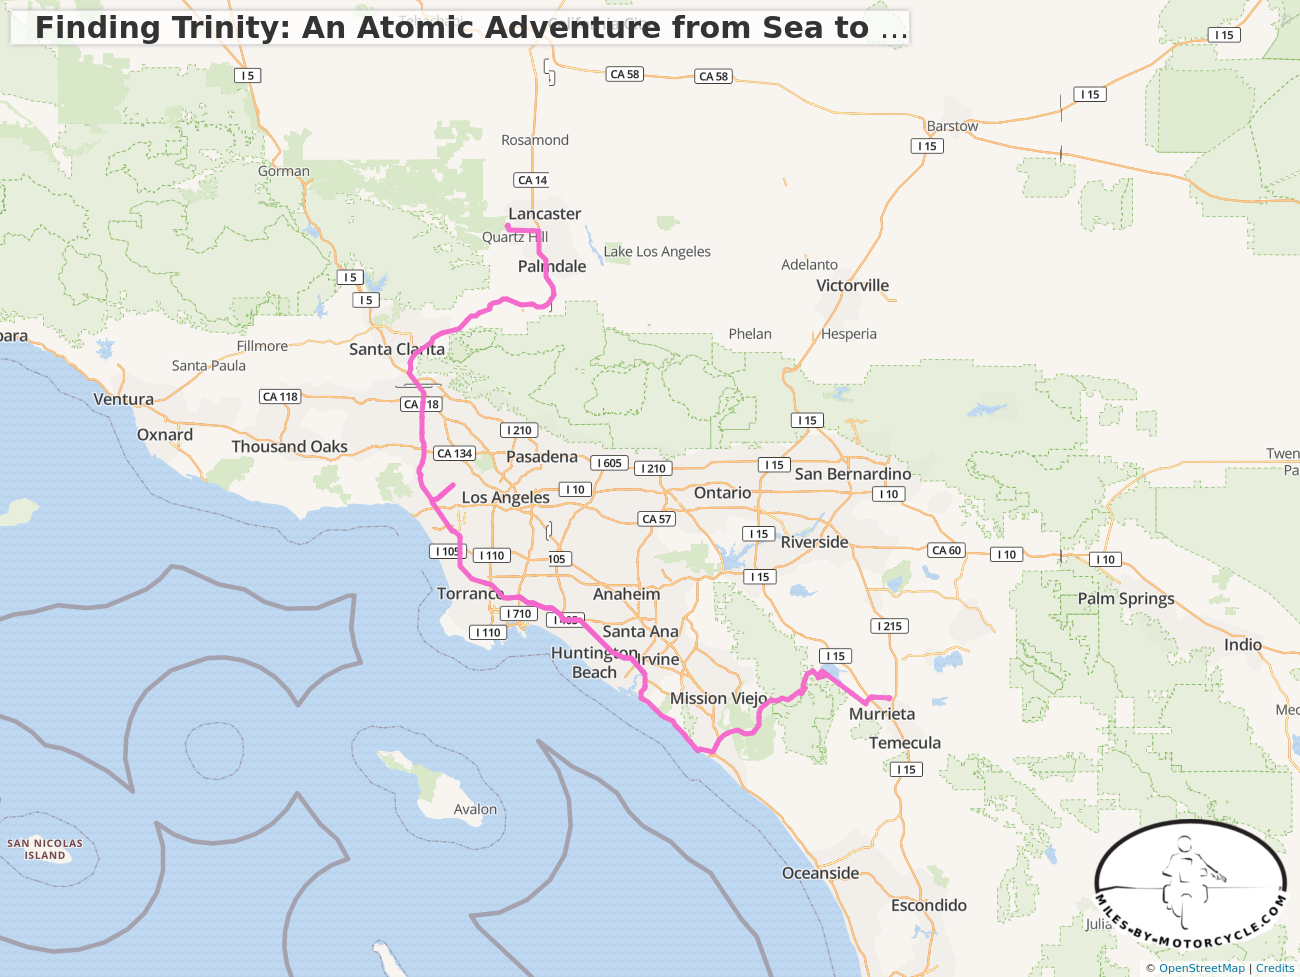 Finding Trinity: An Atomic Adventure from Sea to Glowing Sea Day 13